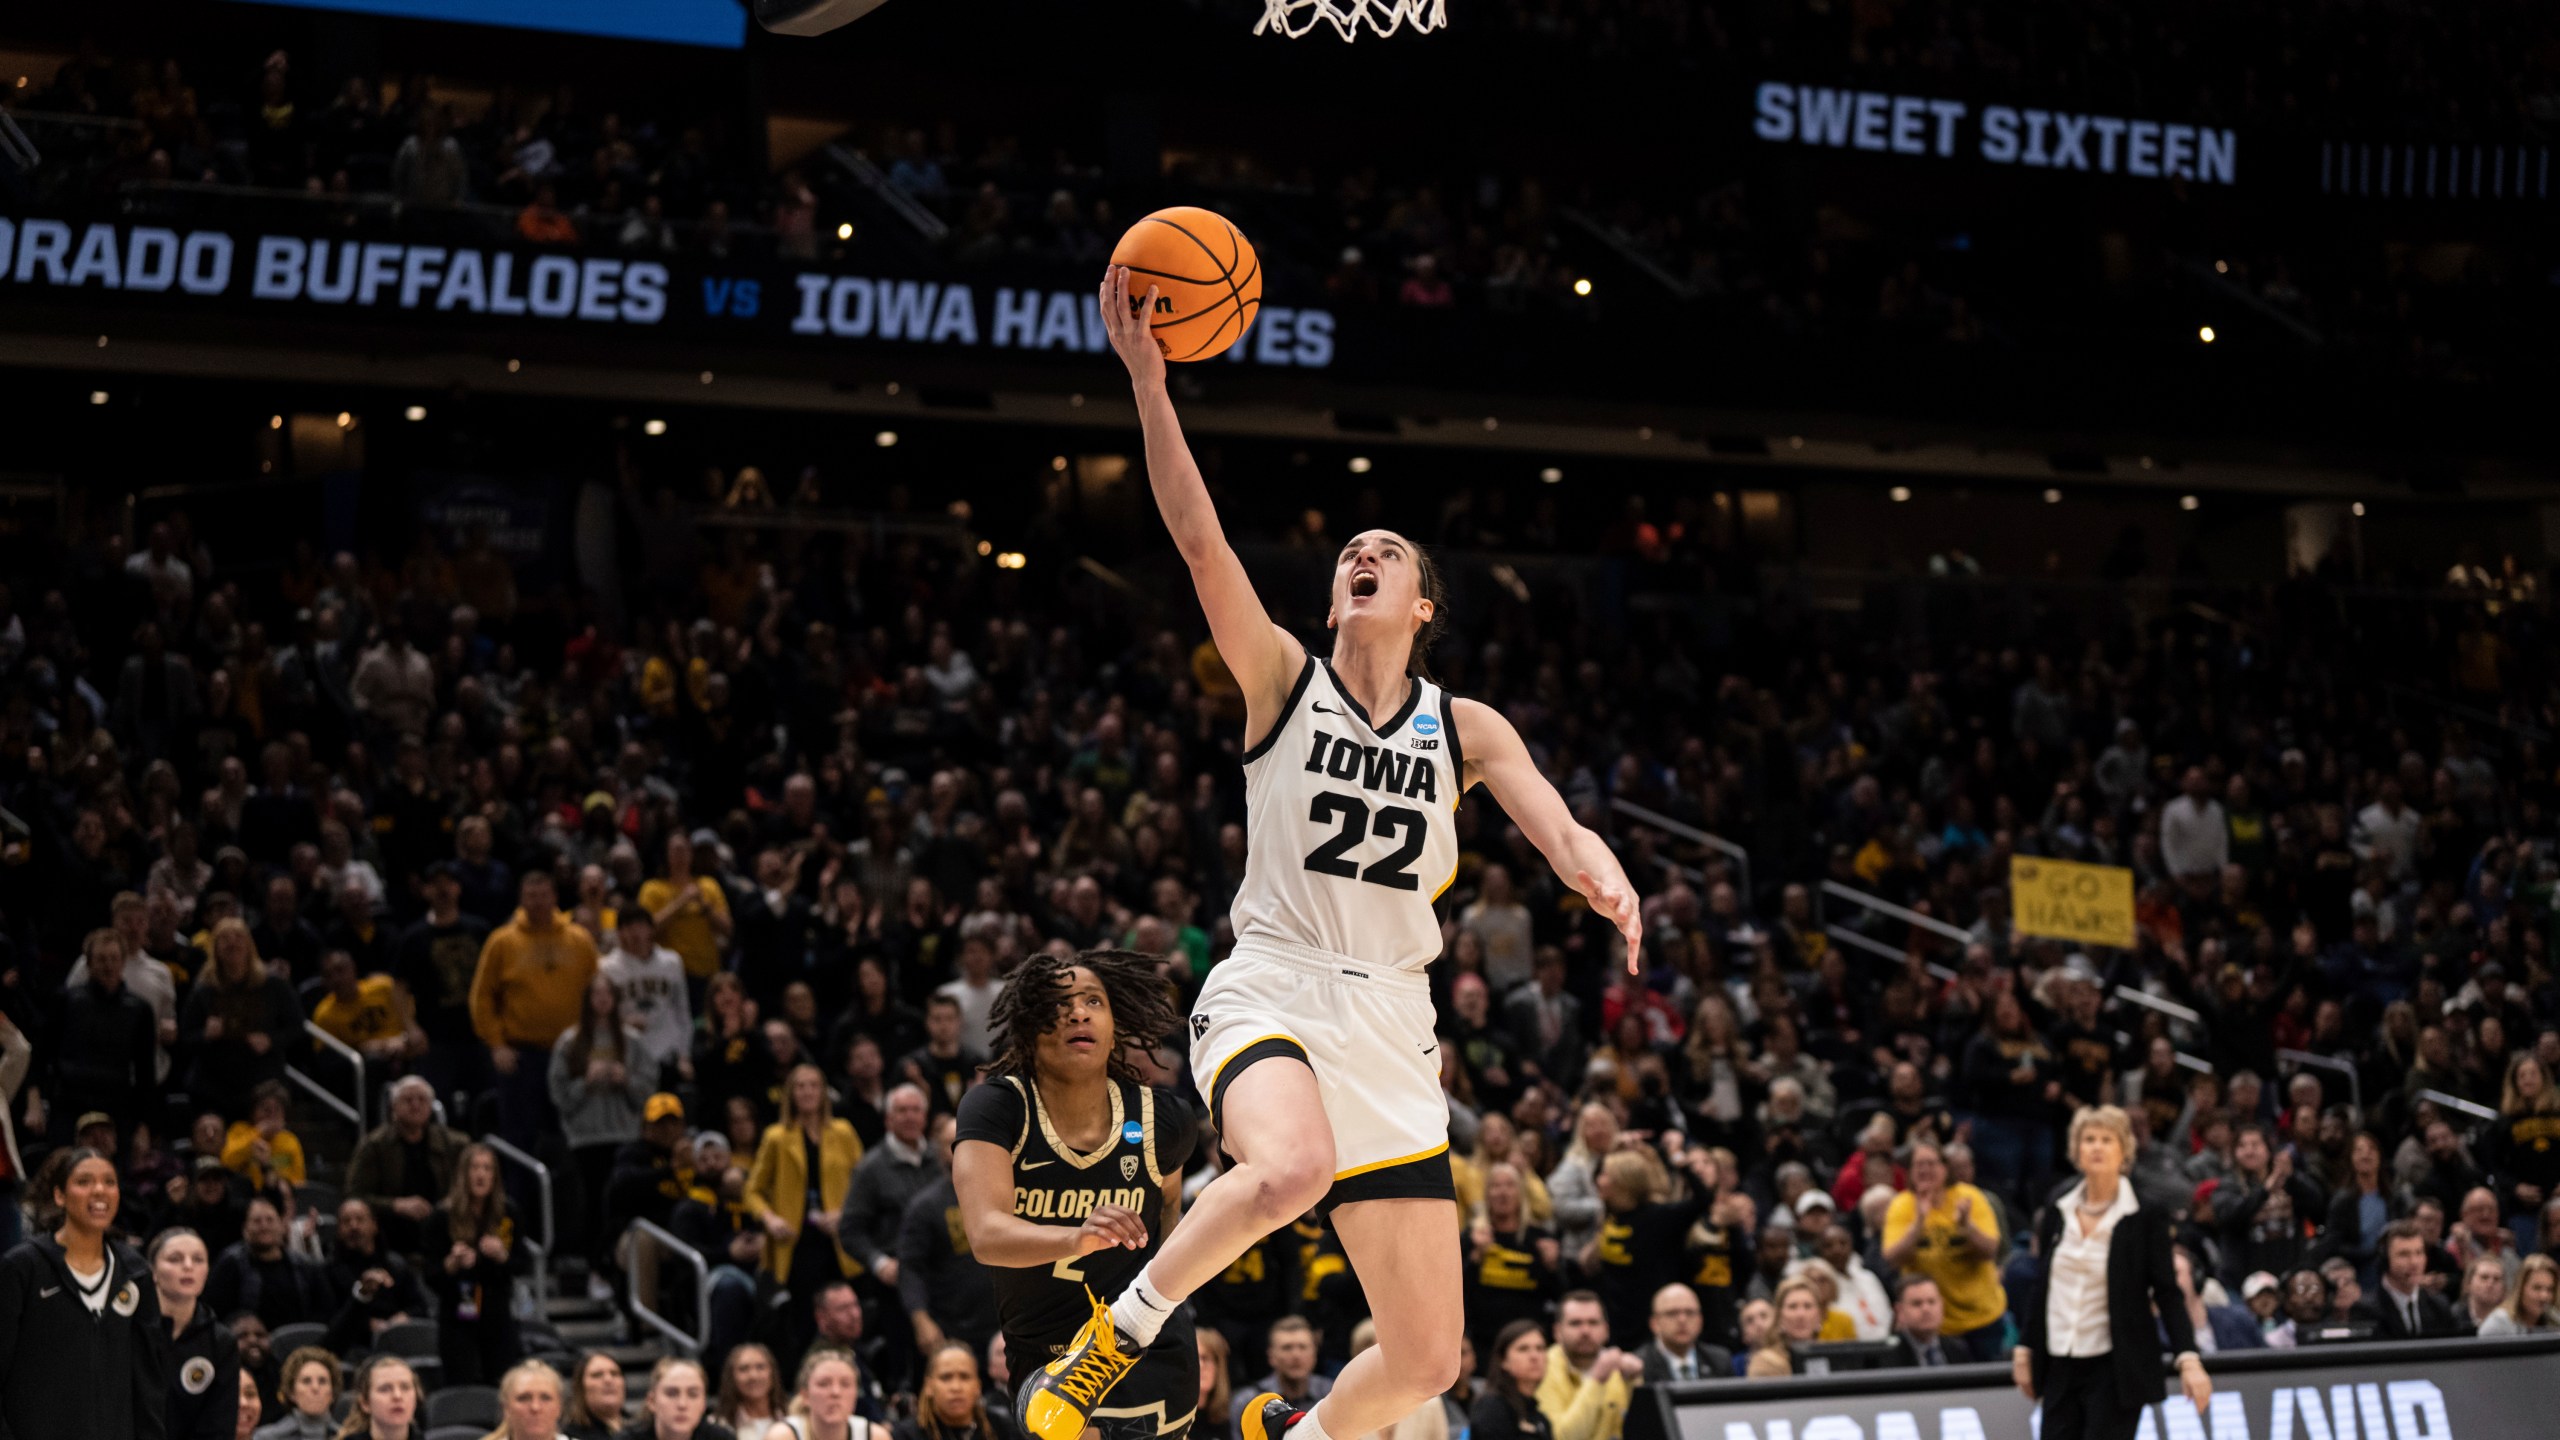 FILE - Iowa guard Caitlin Clark (22) goes up for a layup against Colorado guard Tameiya Sadler during the second half of a Sweet 16 college basketball game of the NCAA tournament, Friday, March 24, 2023, in Seattle.(AP Photo/Stephen Brashear, File)